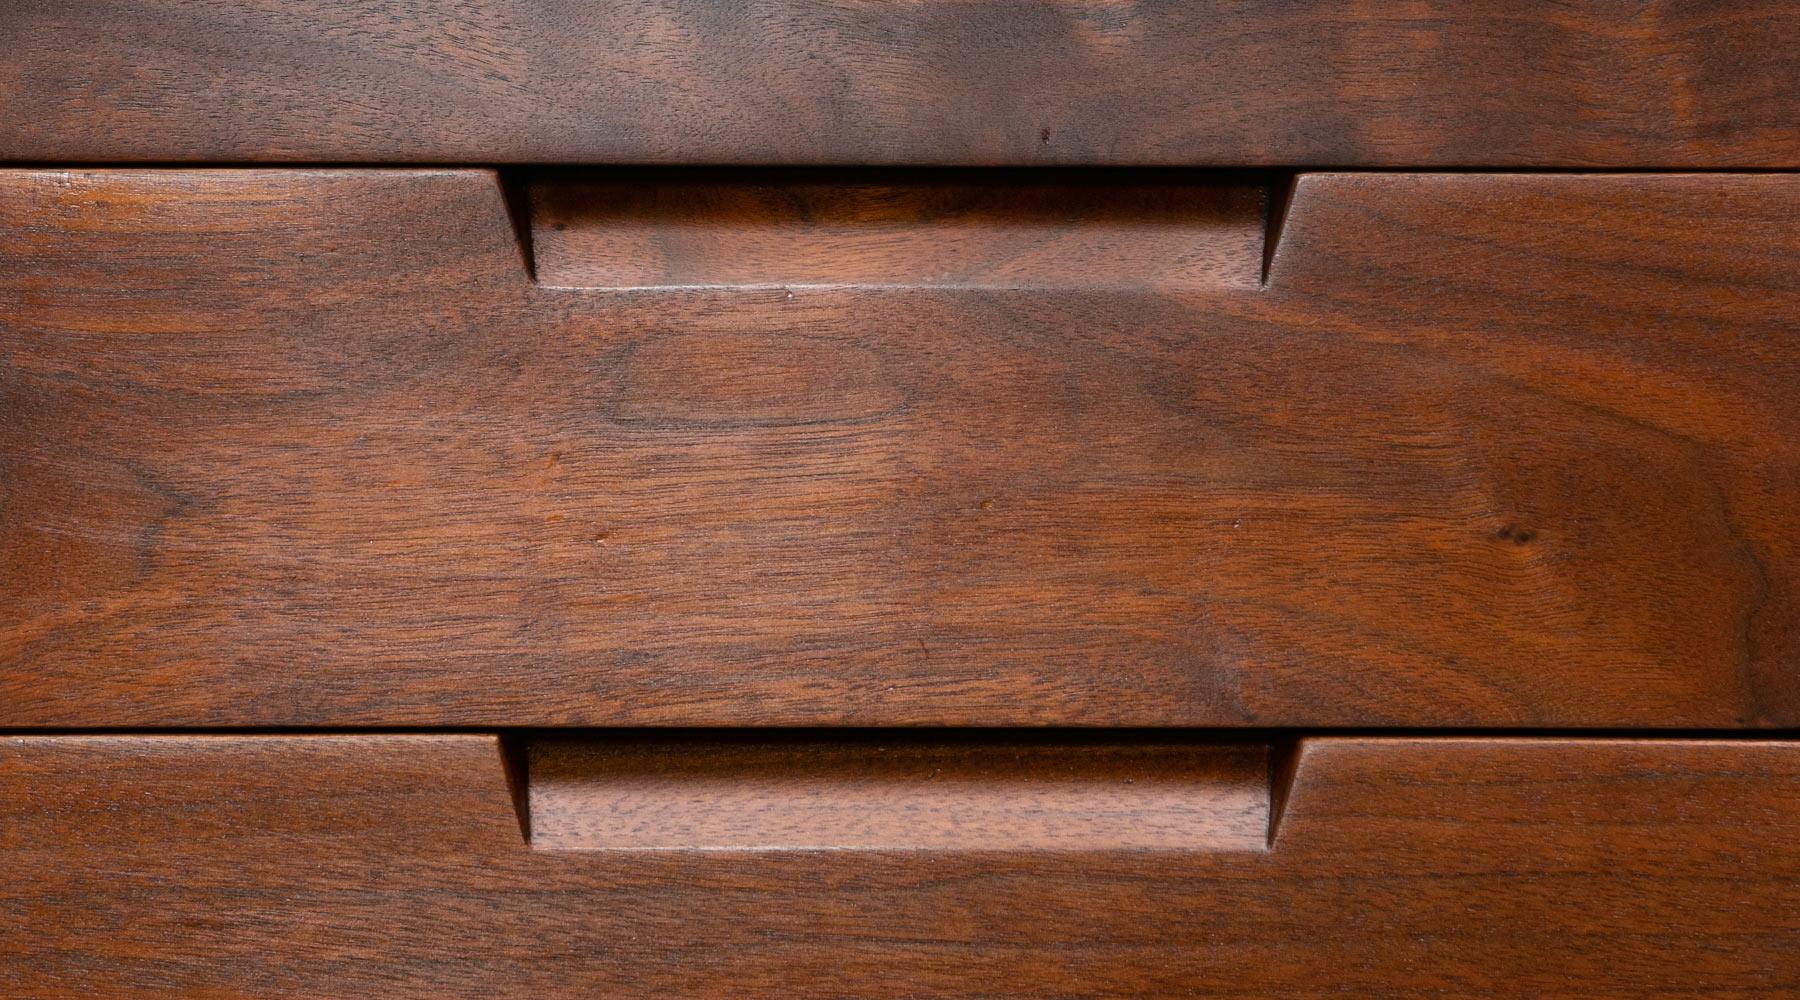 Walnut 1950s Brown Wooden Desk by George Nakashima 'e'